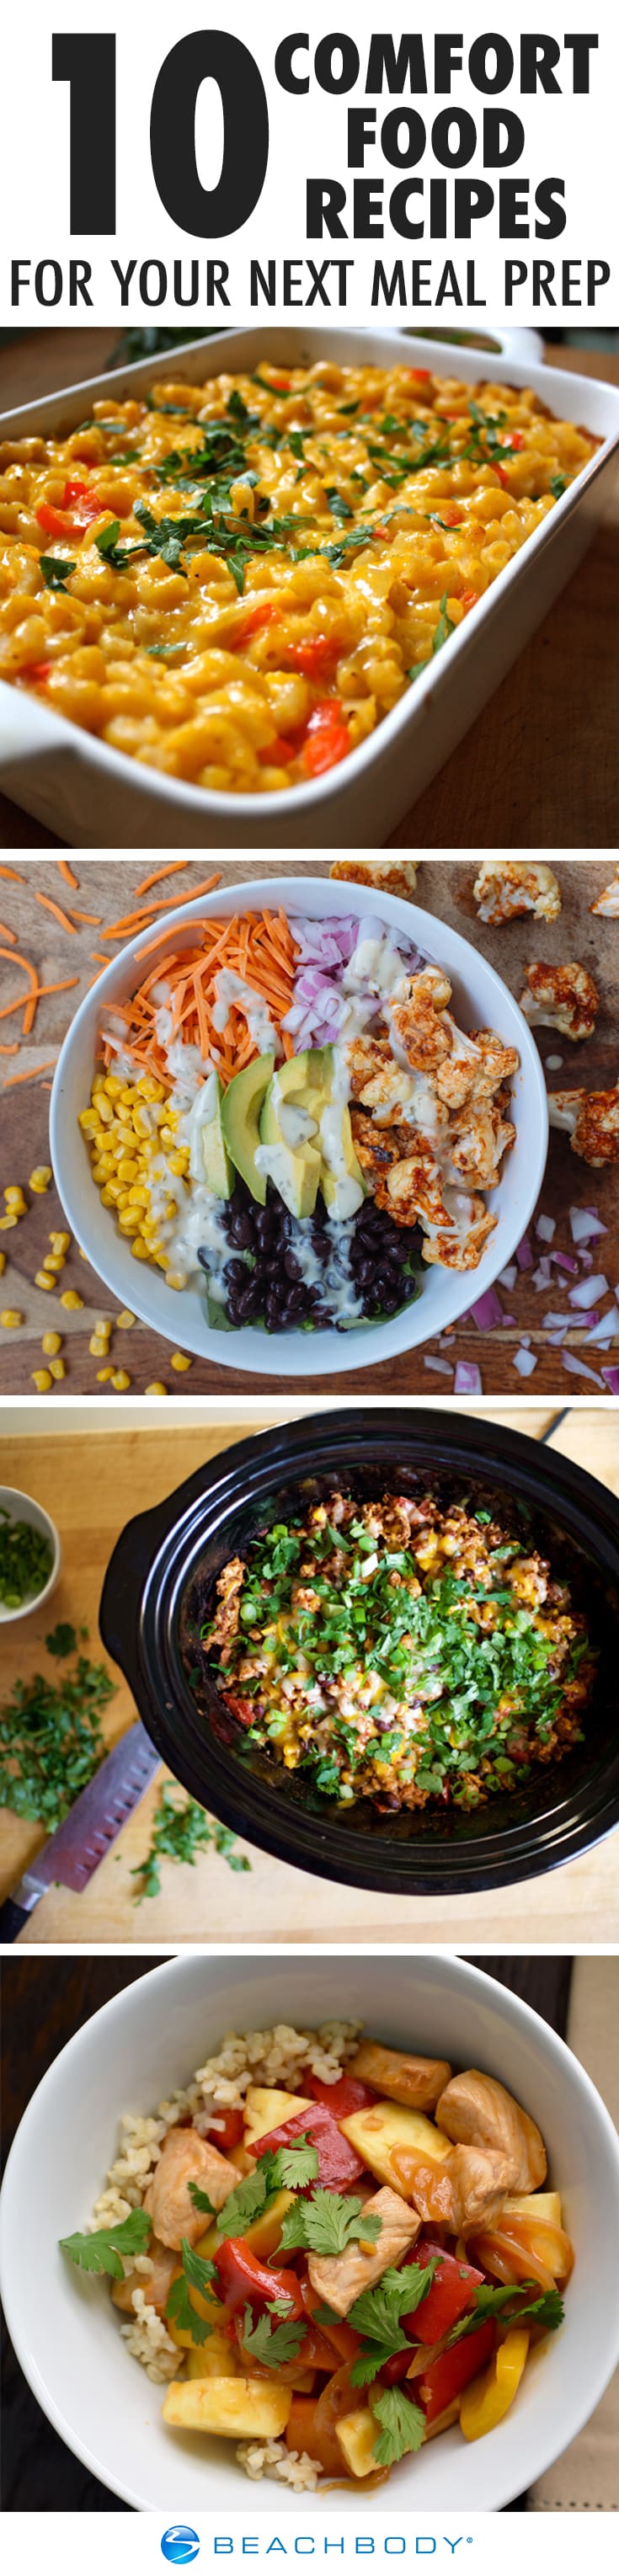 10 Comfort Food Recipes to Try in Your Next Meal Prep #mealprep #mealplan #mealplanning#comfortfood #healthycomfortfood #healthyrecipes #macandcheese #enchiladas #slowcooker